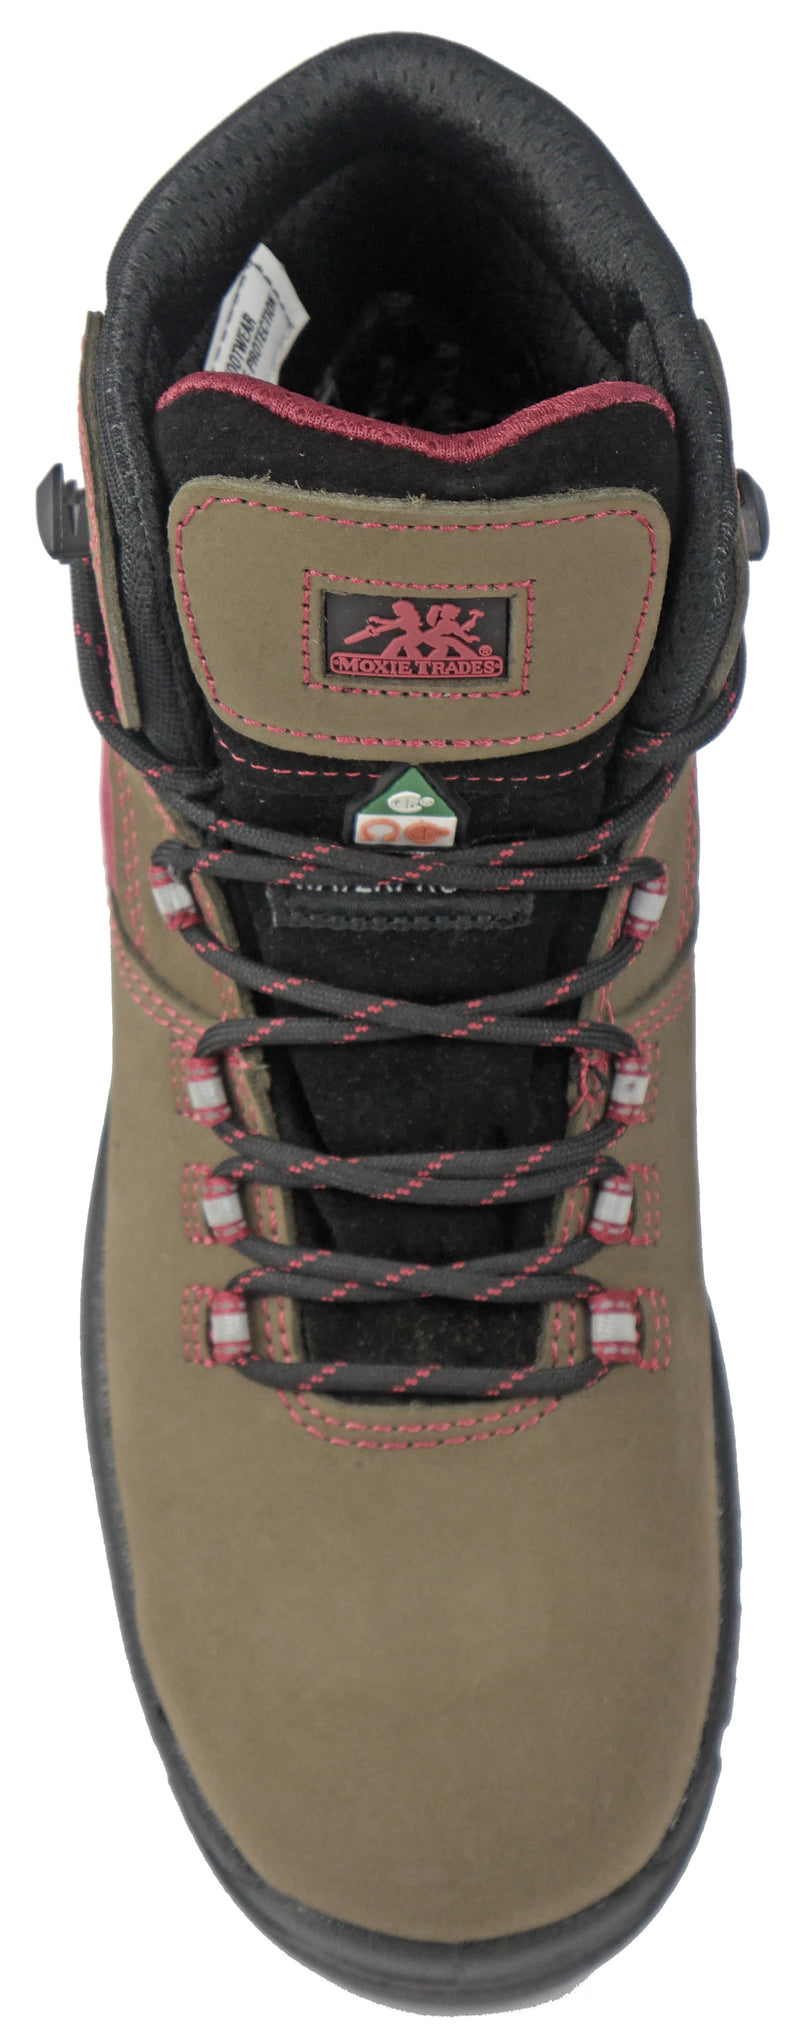 Lacy 6" Olive Composite Toe